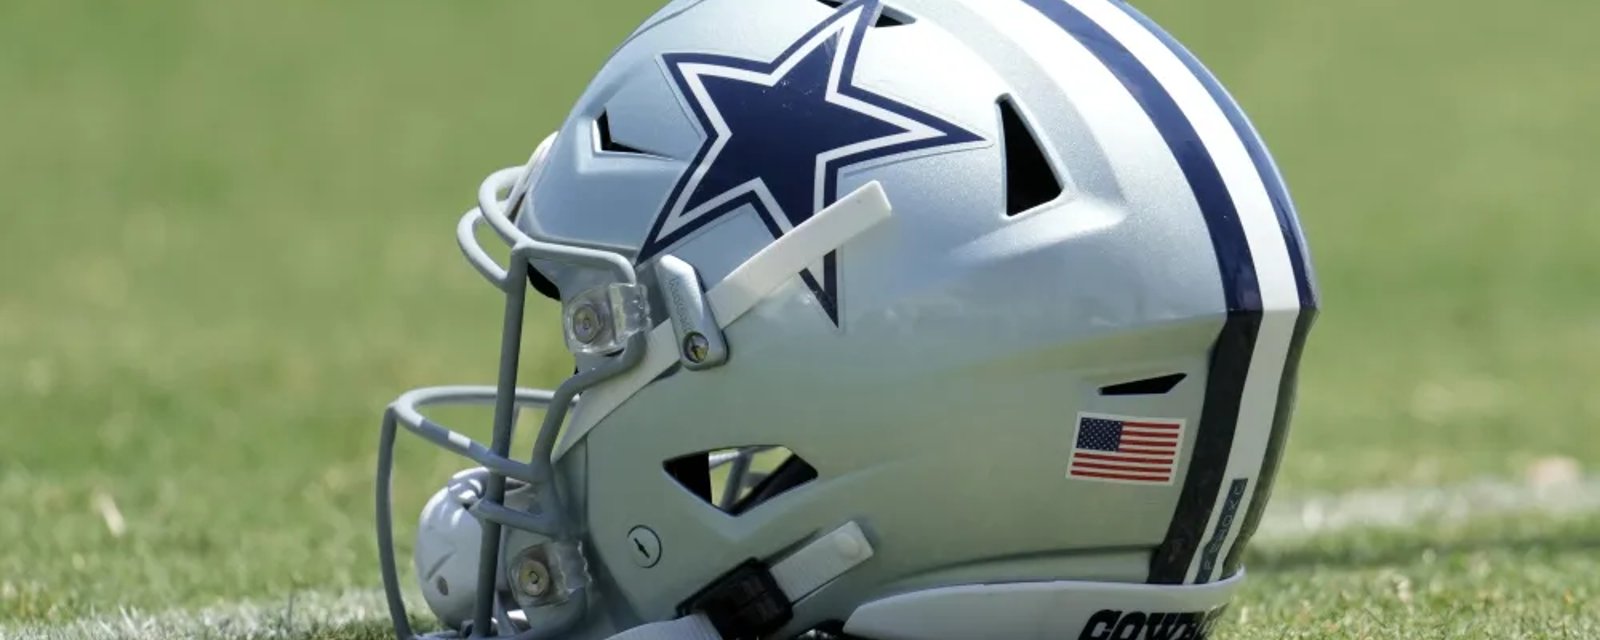 Dallas Cowboys already dealing with injury woes